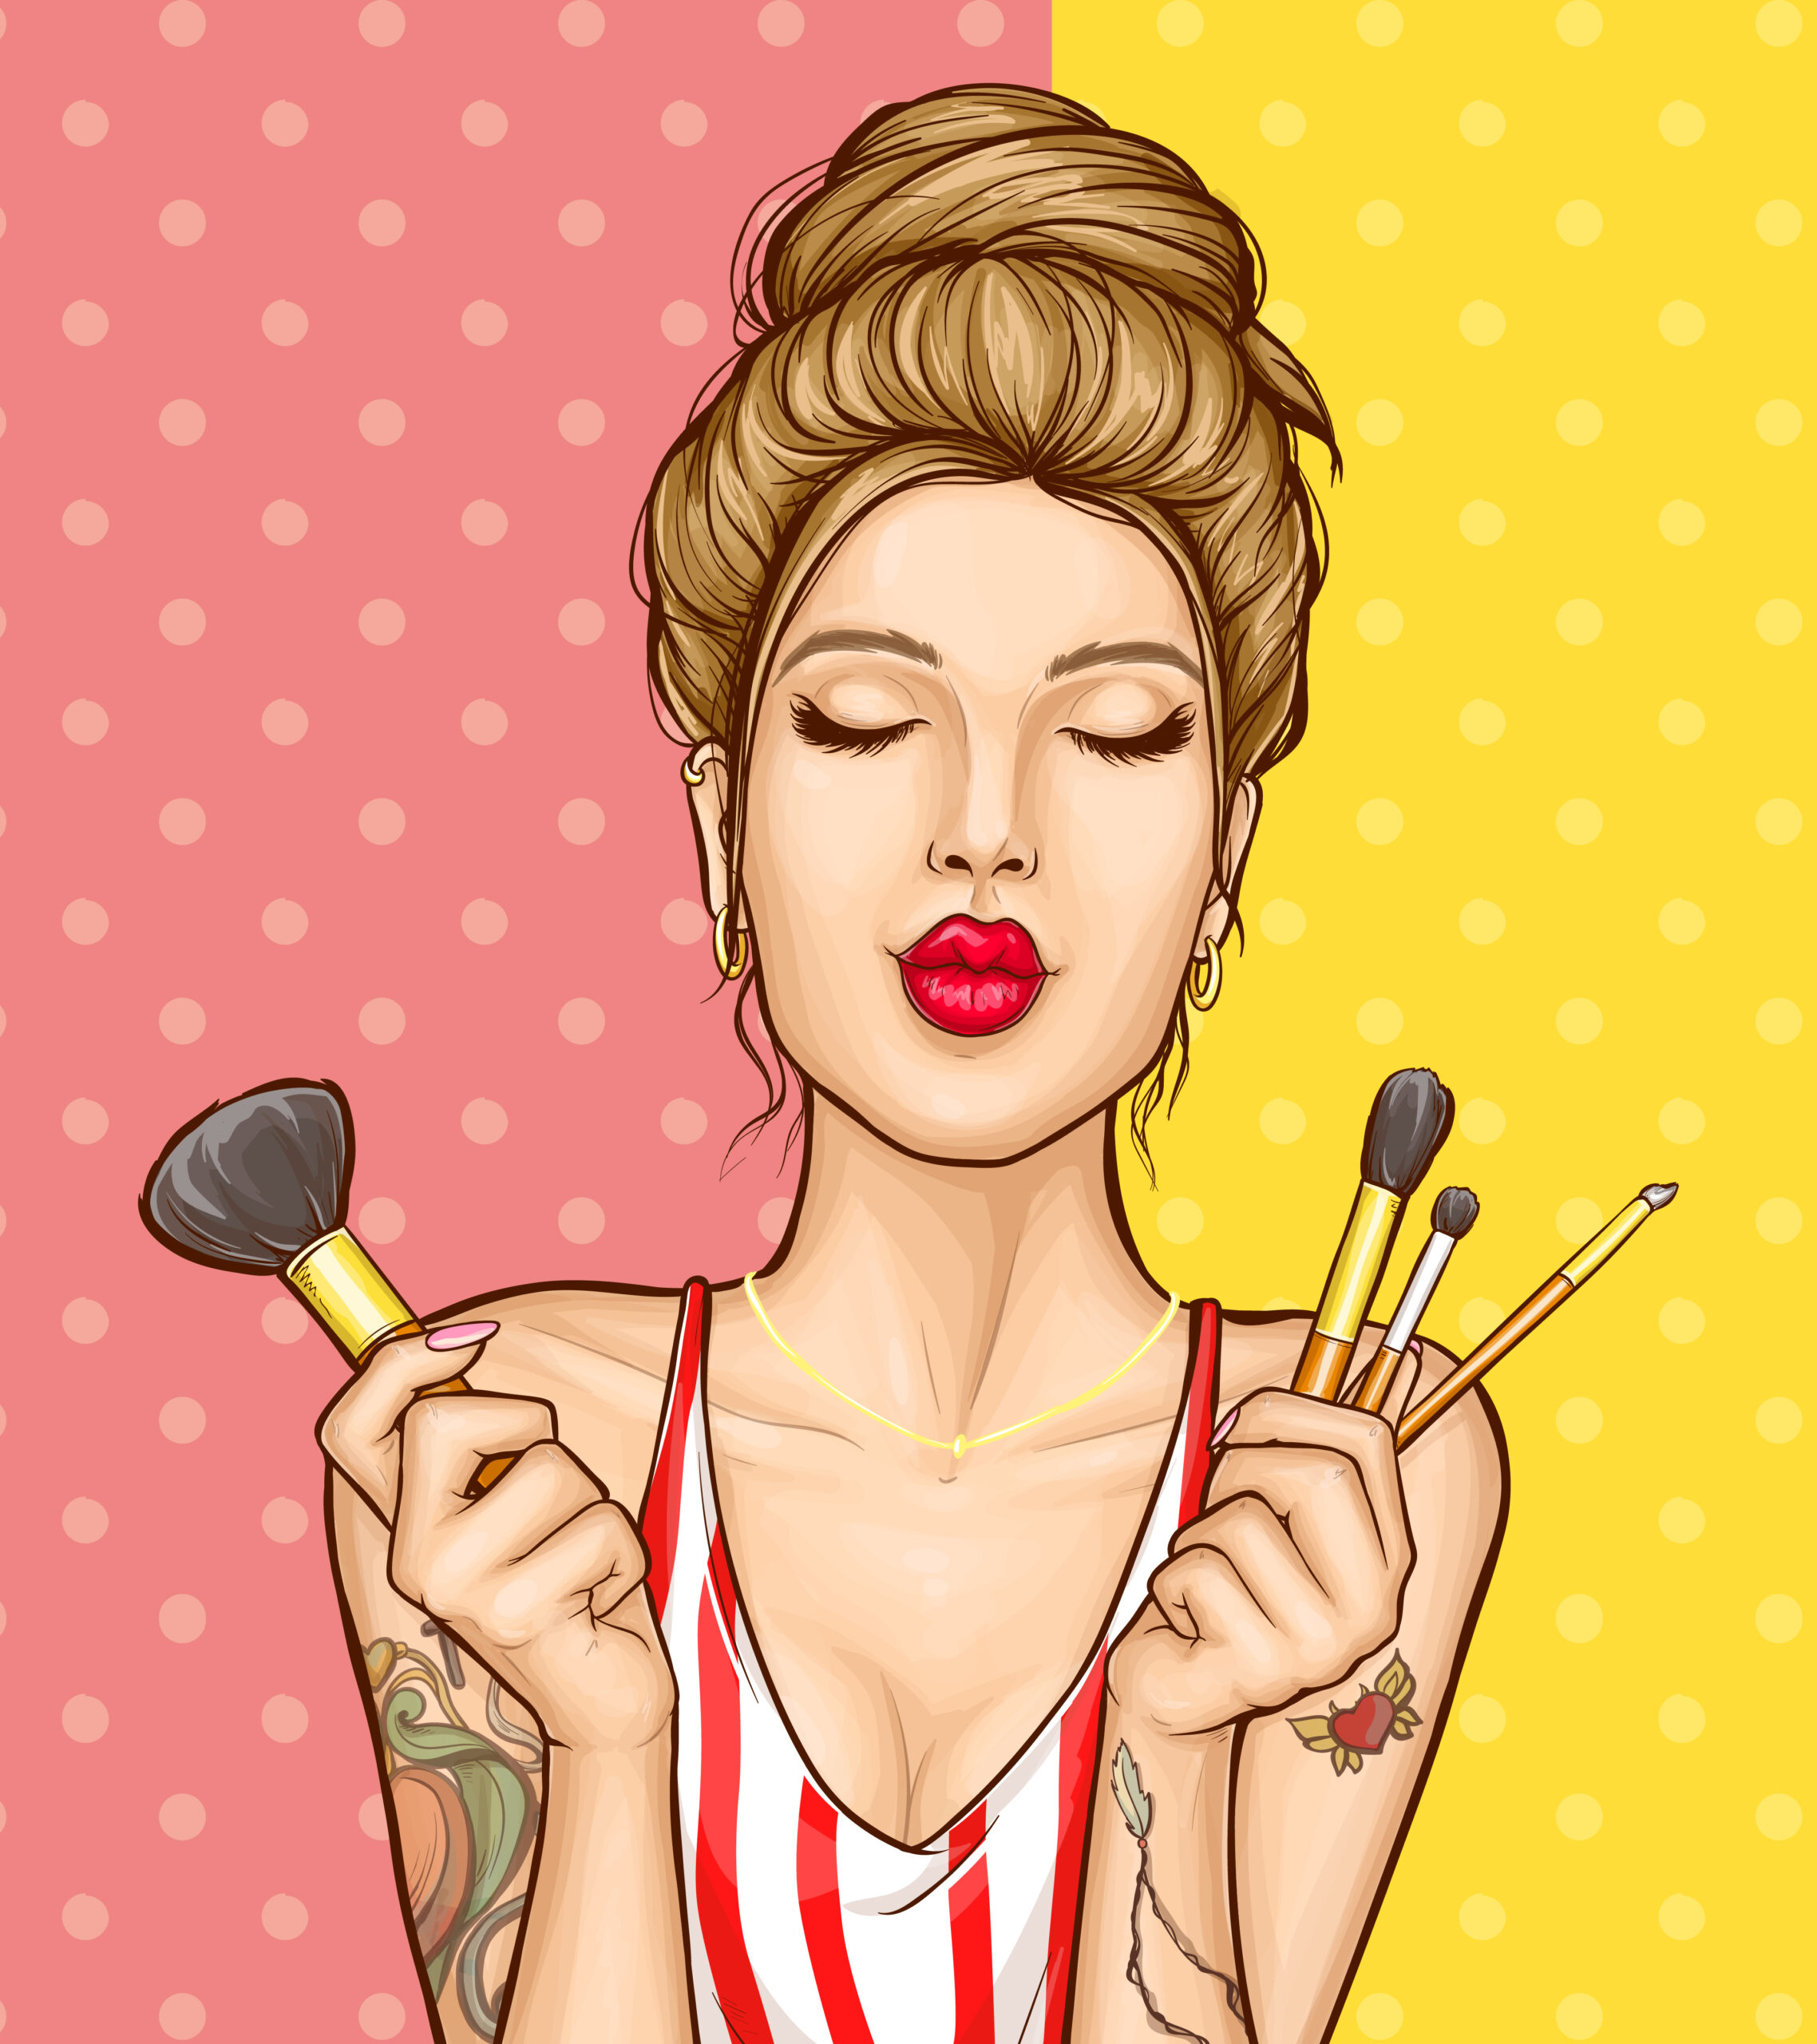 Beauty saloon, face makeup cosmetics pop art vector advertising banner or promo poster template. Shoulder portrait of young, woman with closed eyes, holding various makeup brushes in hand illustration